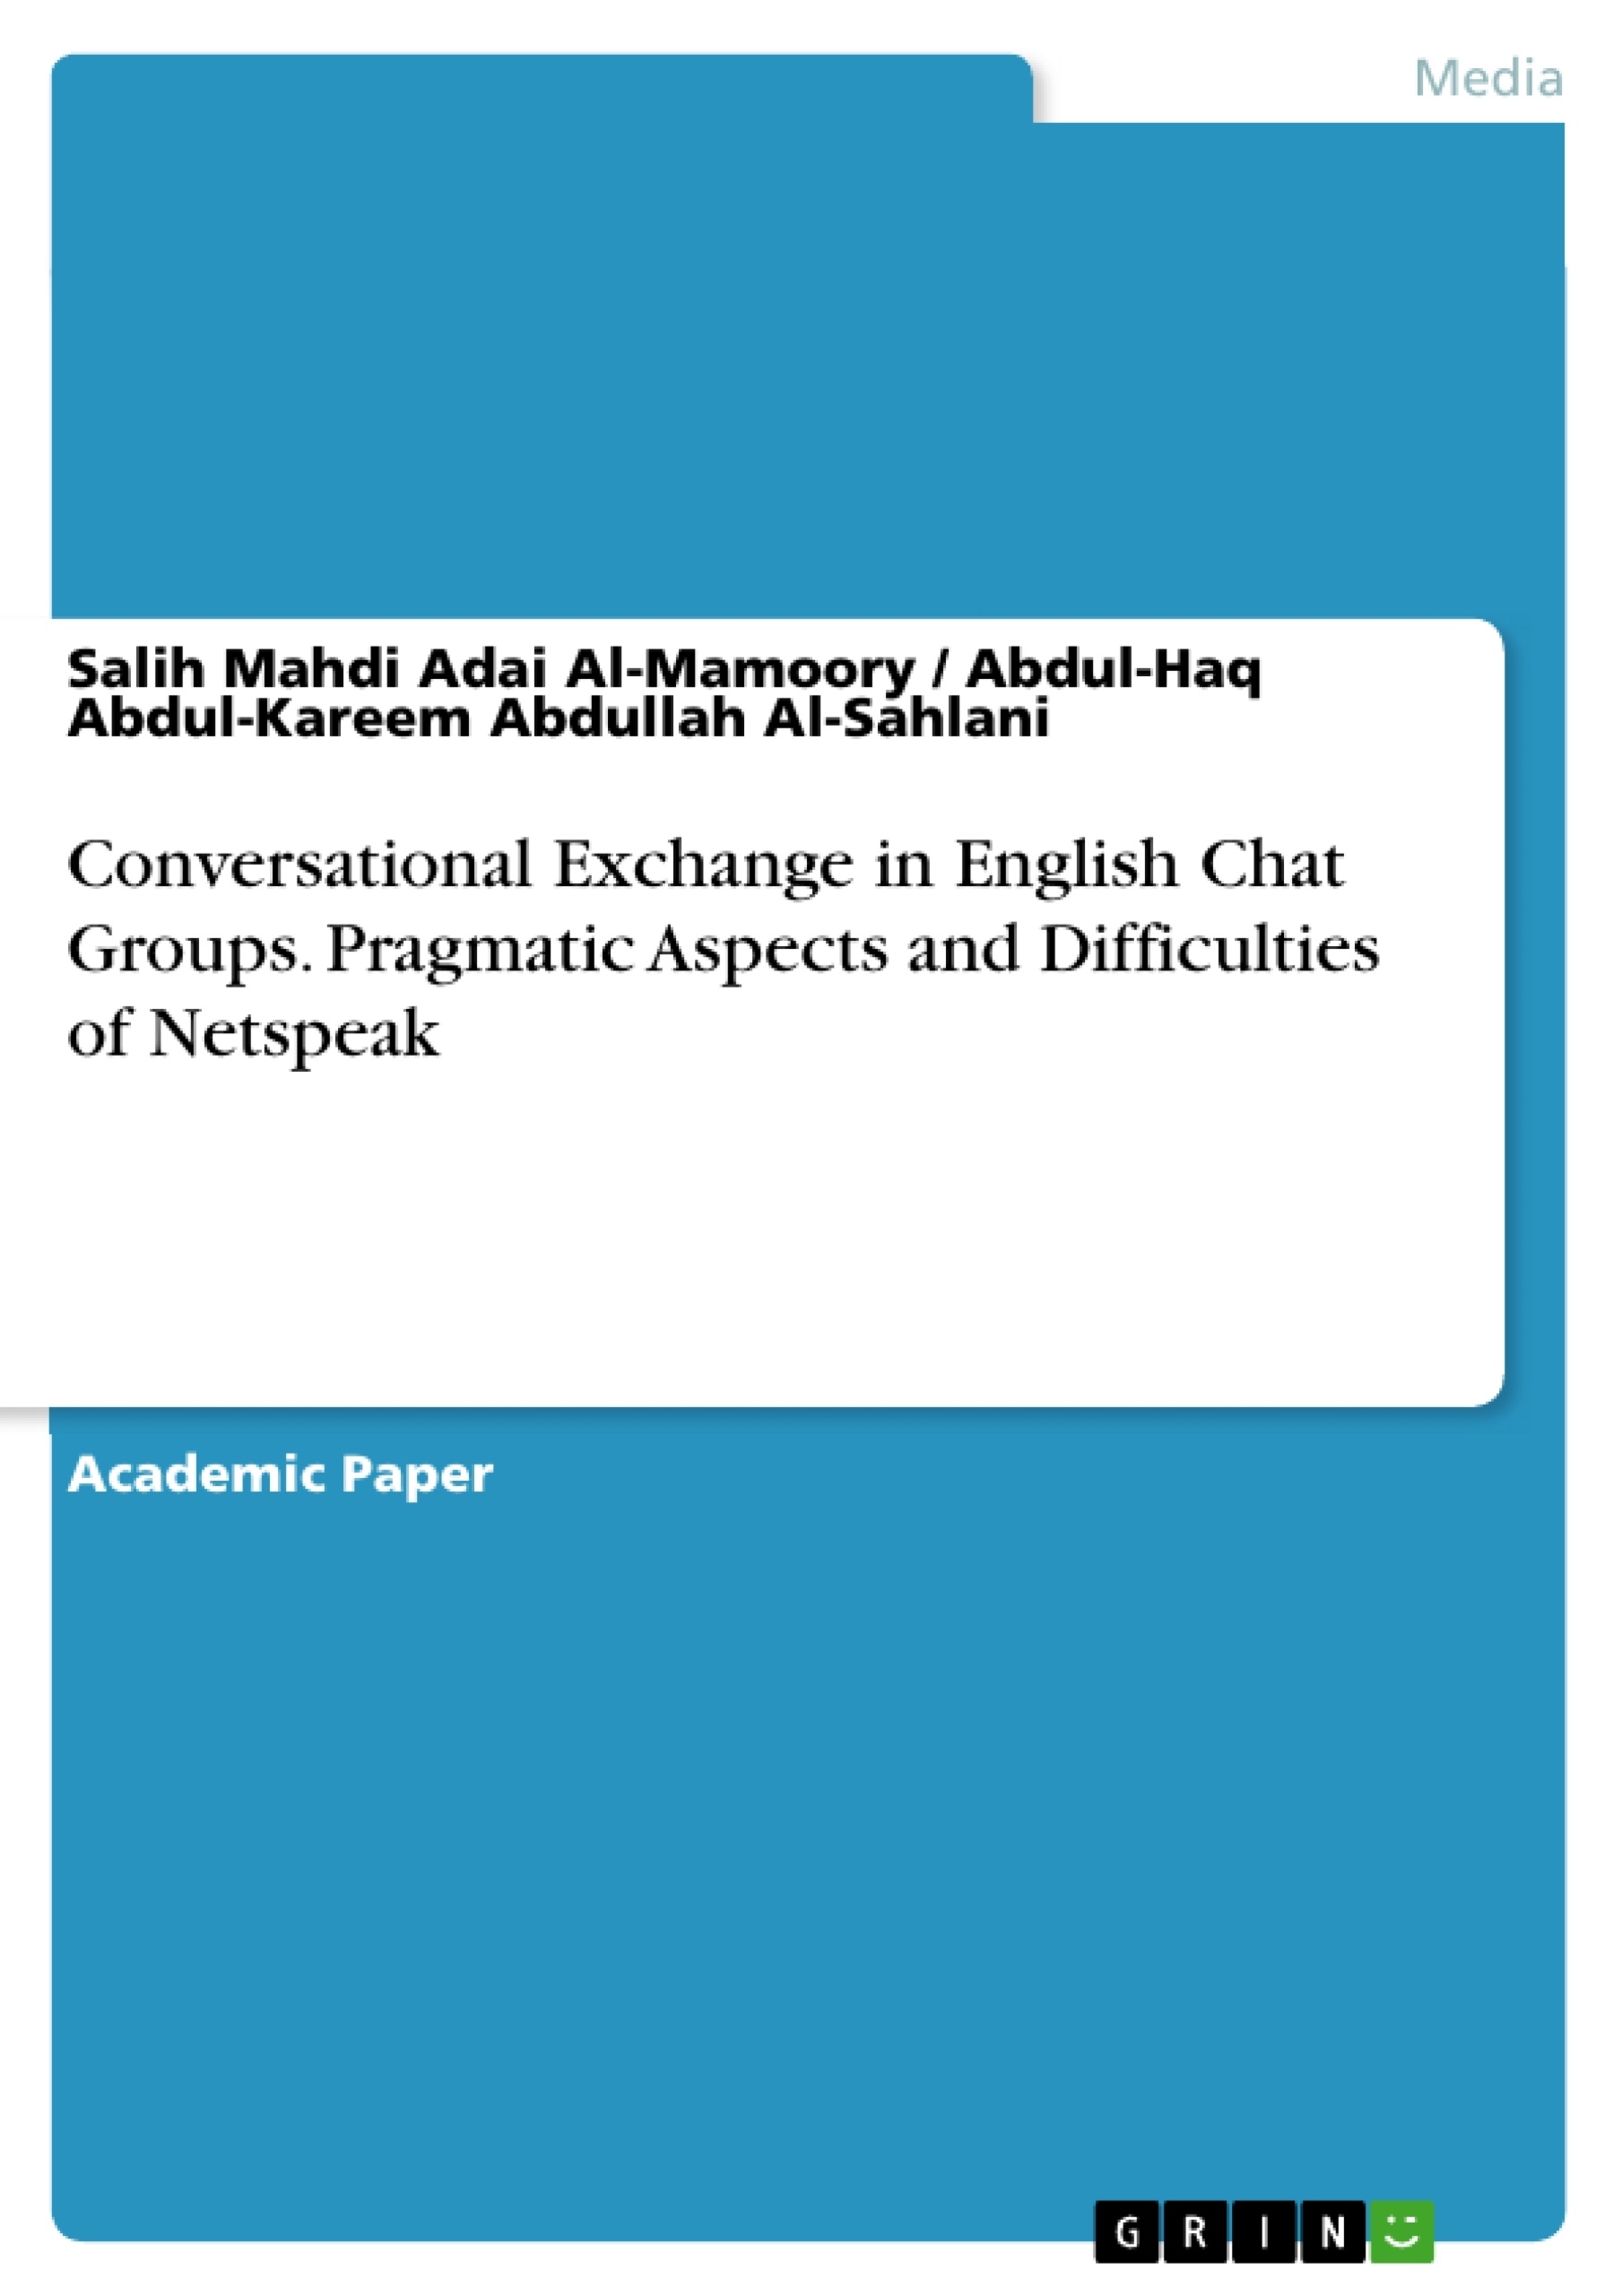 Título: Conversational Exchange in English Chat Groups. Pragmatic Aspects and Difficulties of Netspeak